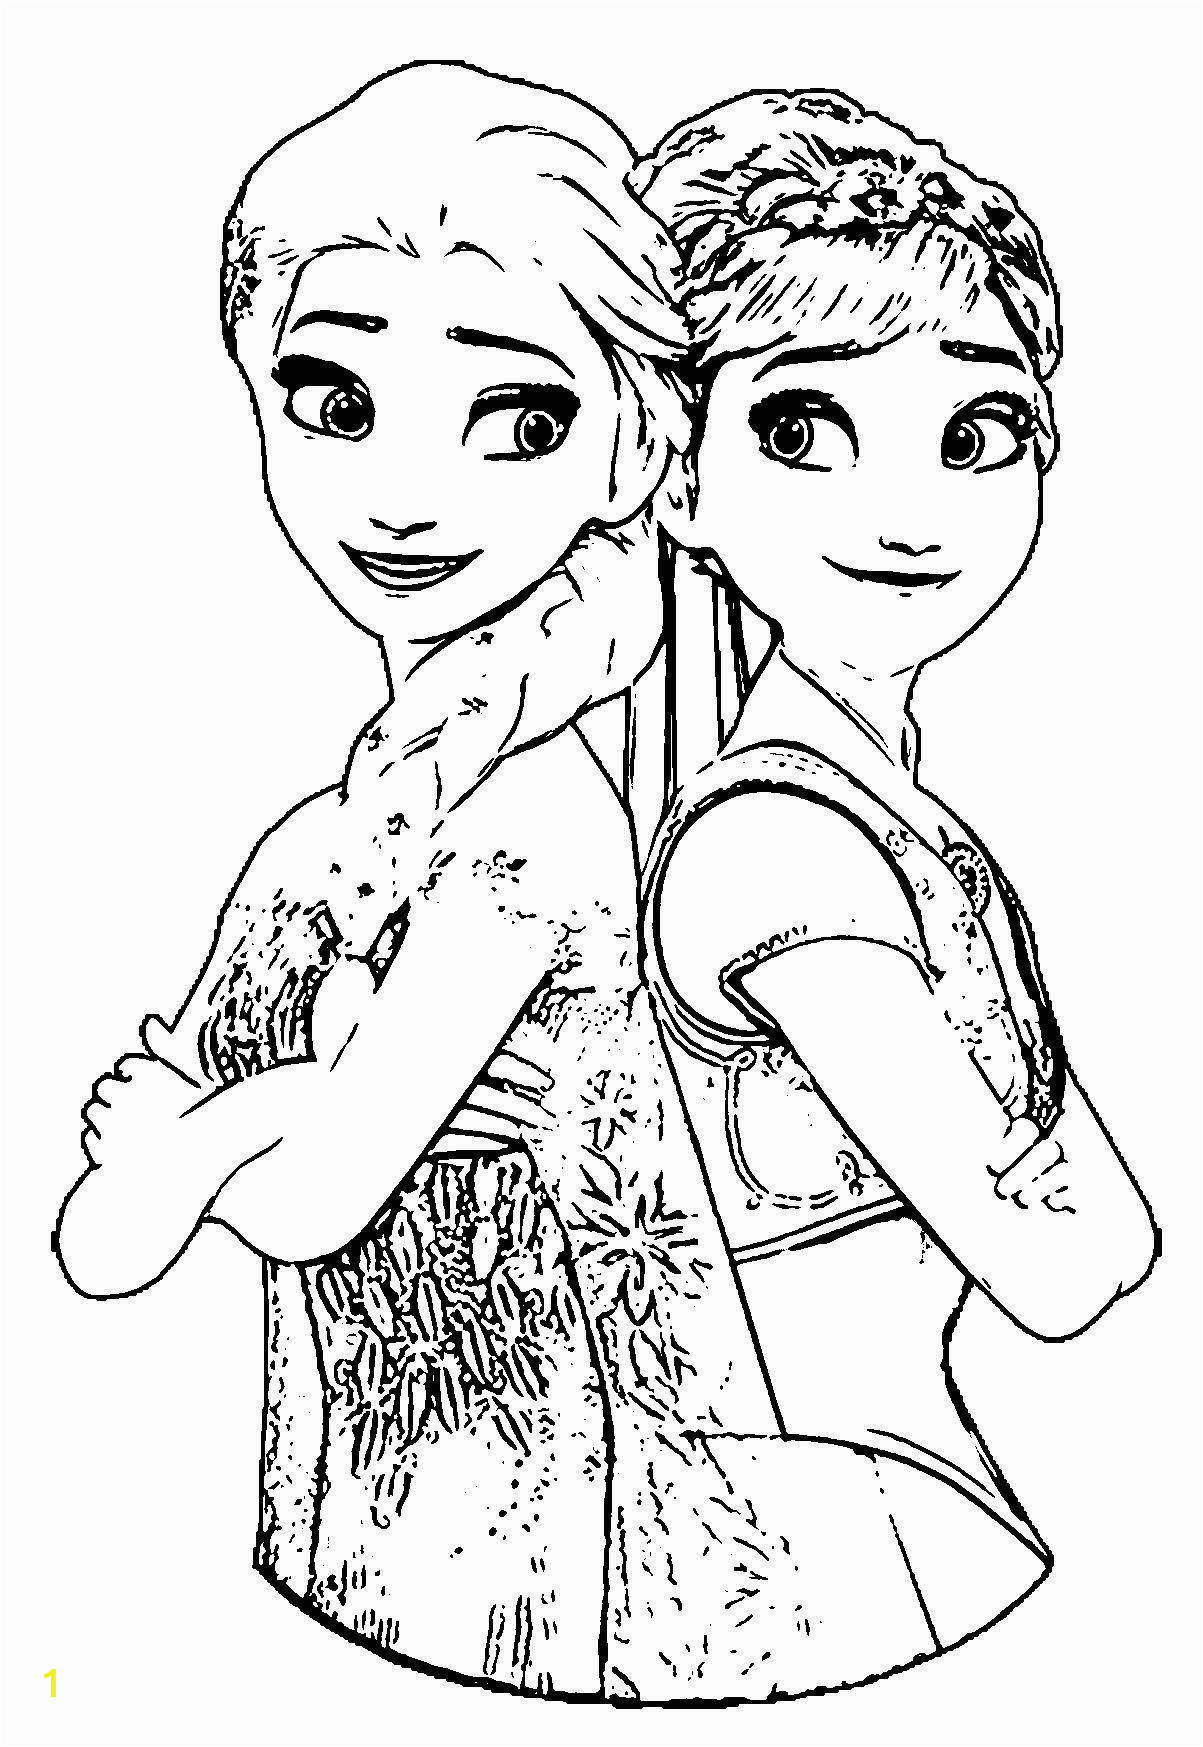 Frozen Fever Coloring Pages to Print Frozen Fever Coloring Pages Coloring Pages